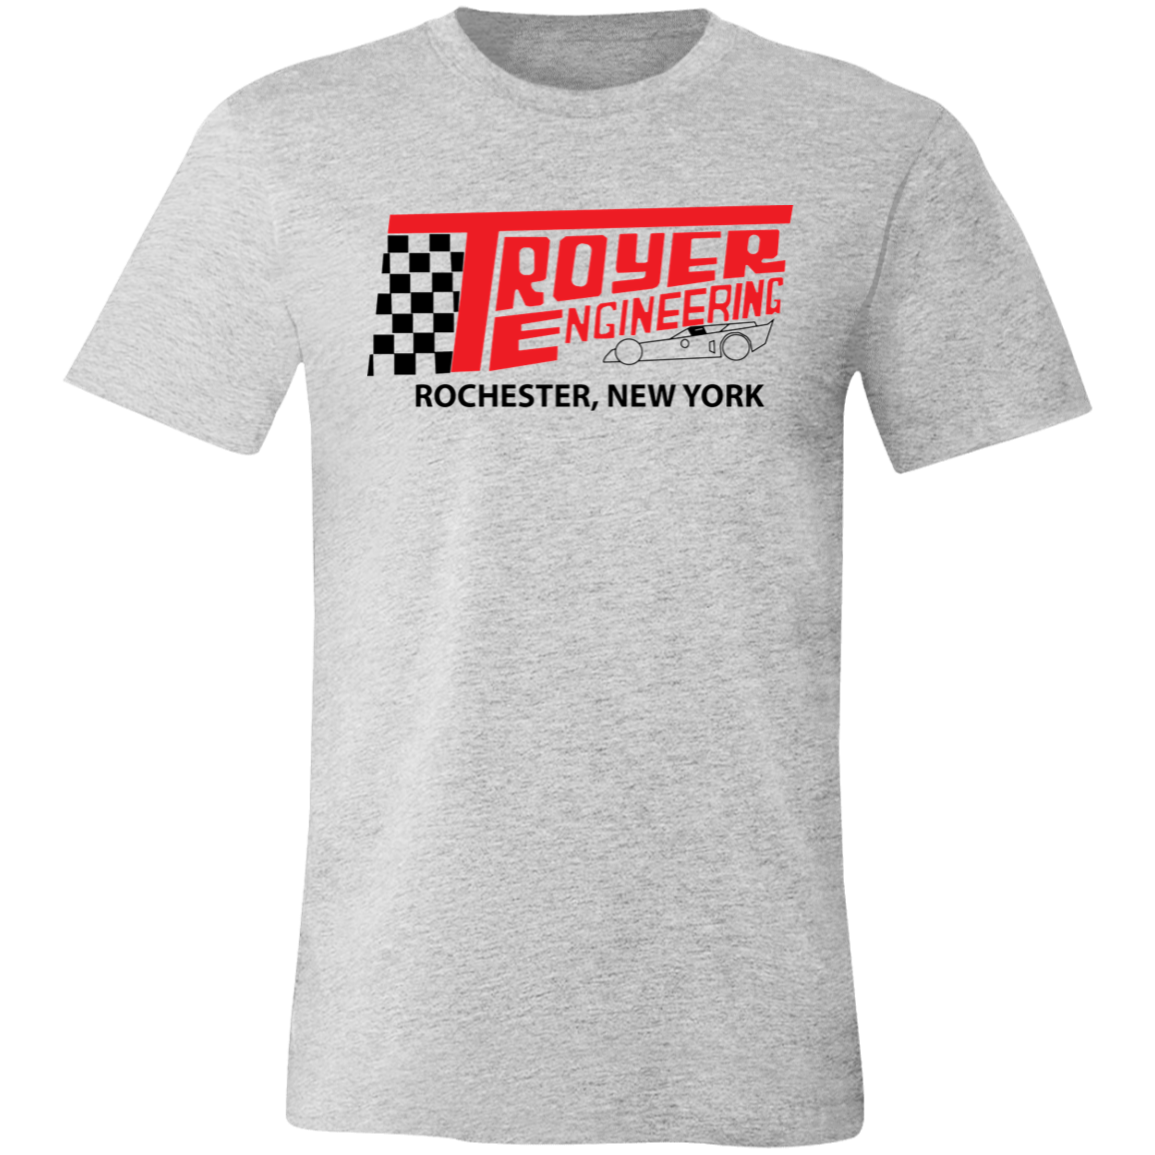 Troyer Engineering - Tri Blend T-Shirt - Limited Sizes Available!